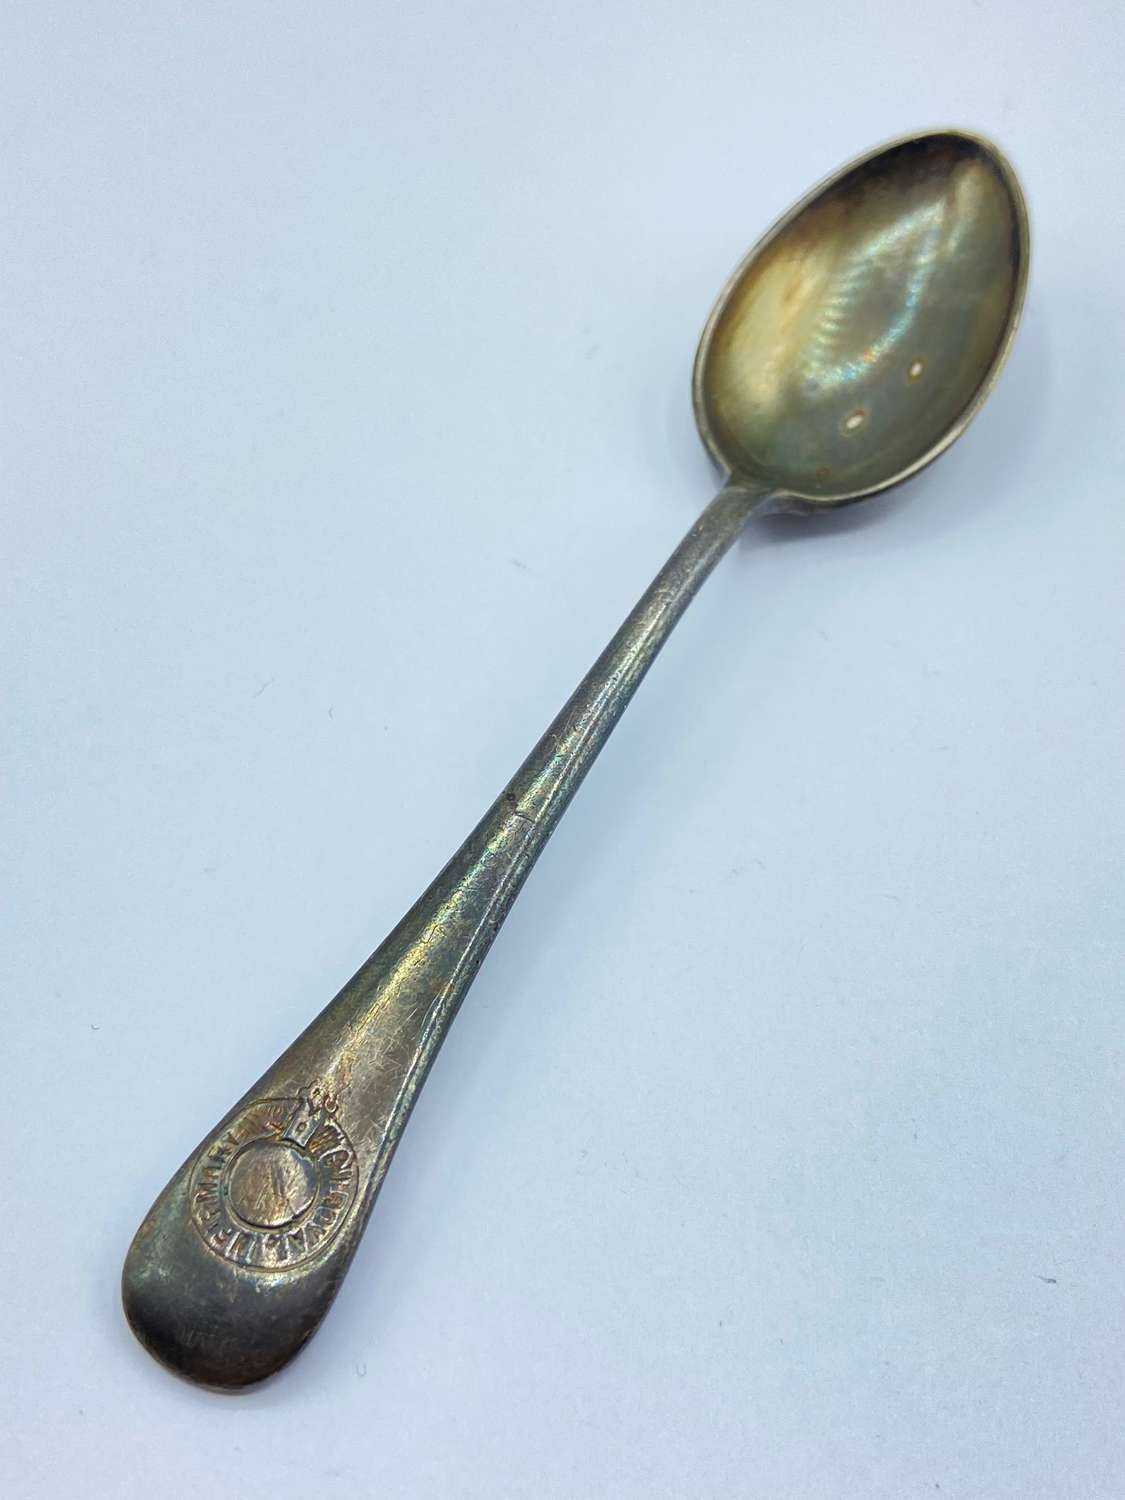 WW1 Period British Wounded Soldiers Royal Infirmary Hospital Spoon